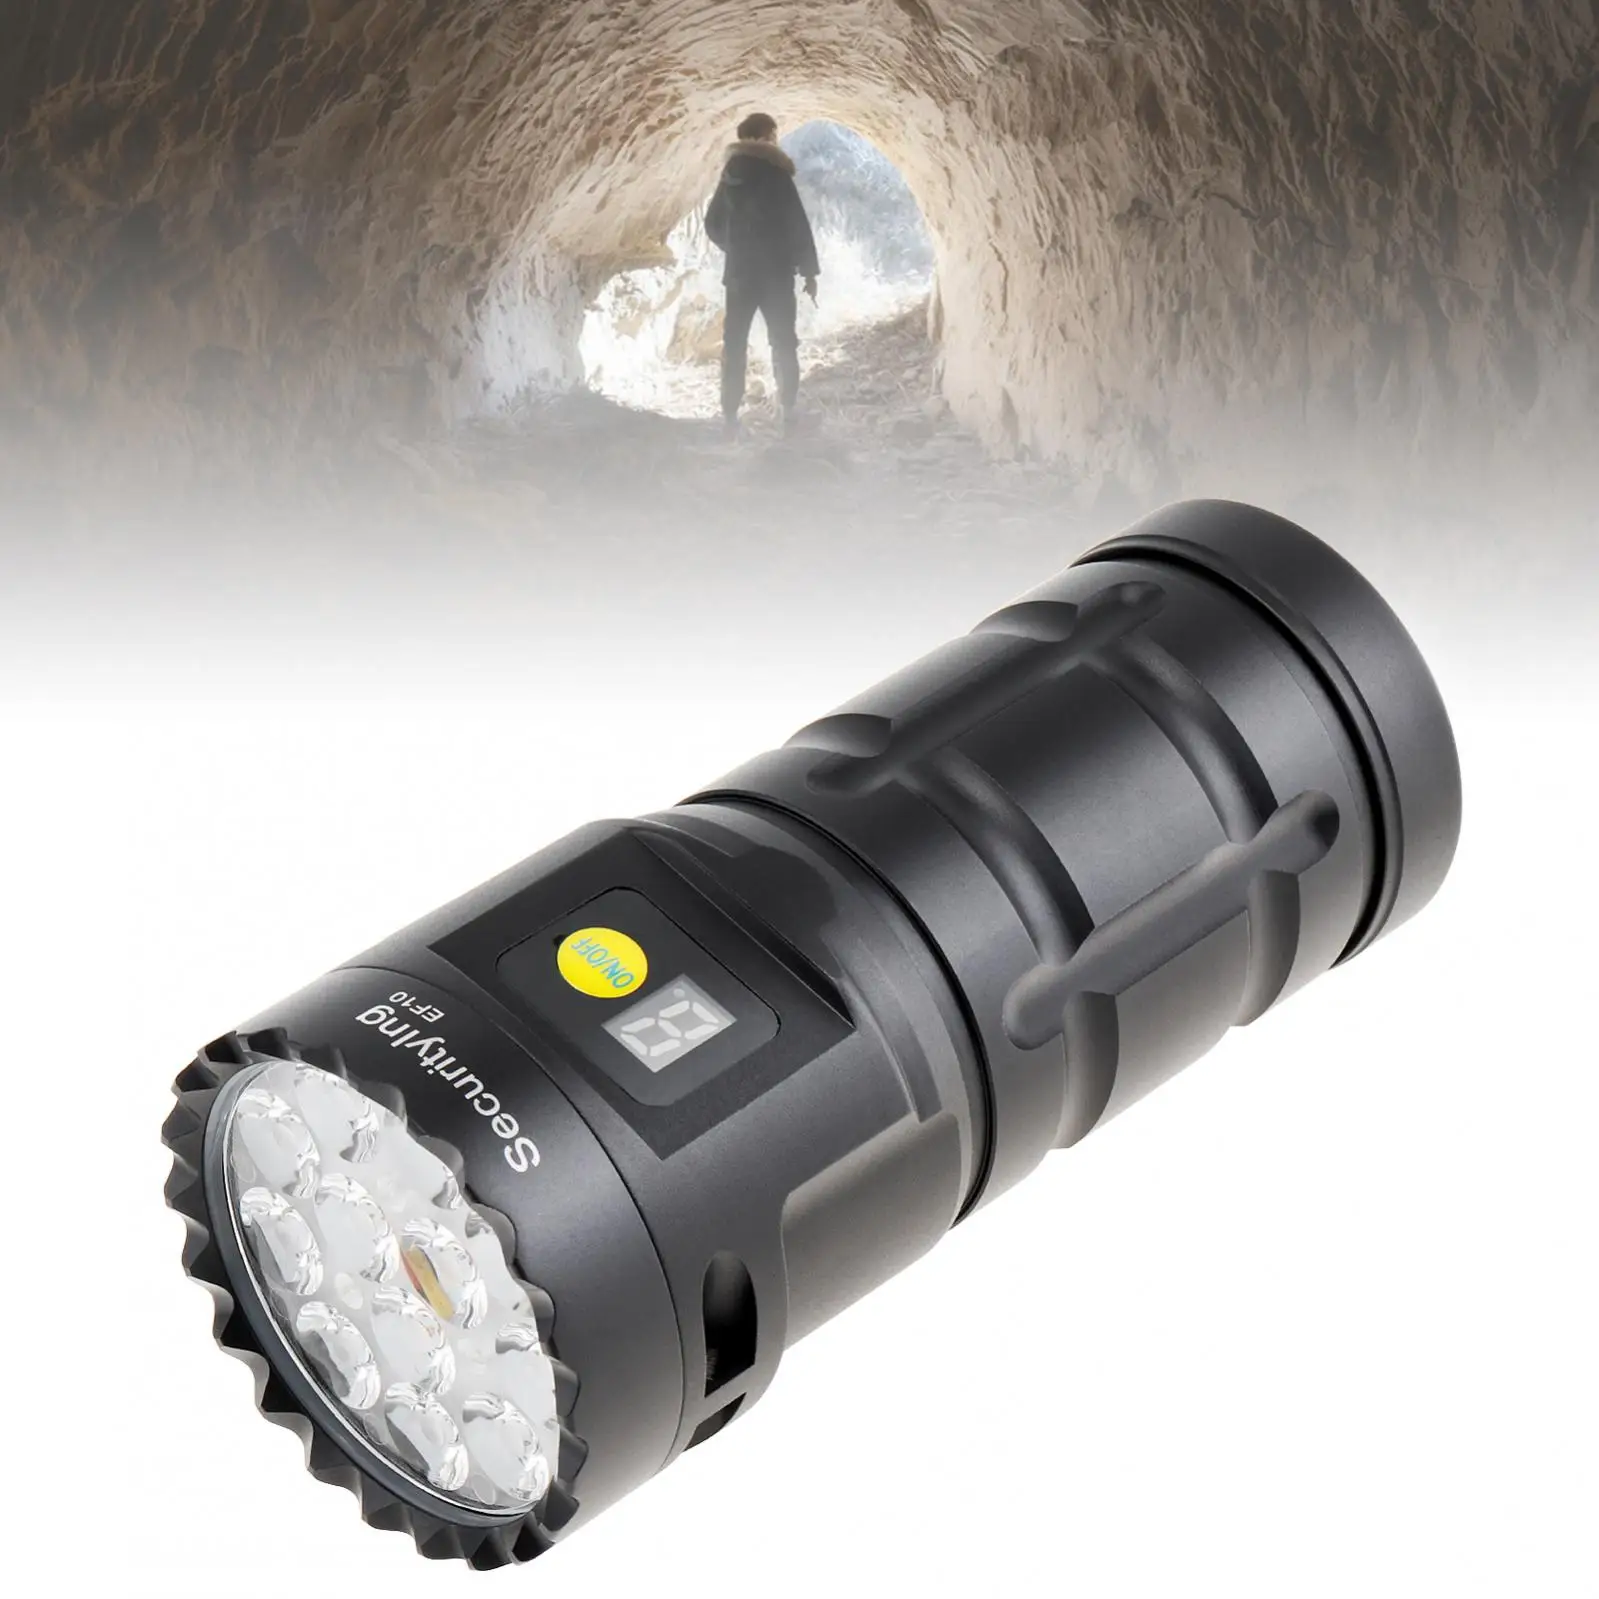 

SecurityIng EF10 5500 Lumens IPX6 Rechargeable EDC Flashlight for Camping / Outdoor / Night Climbing with Power Indicator